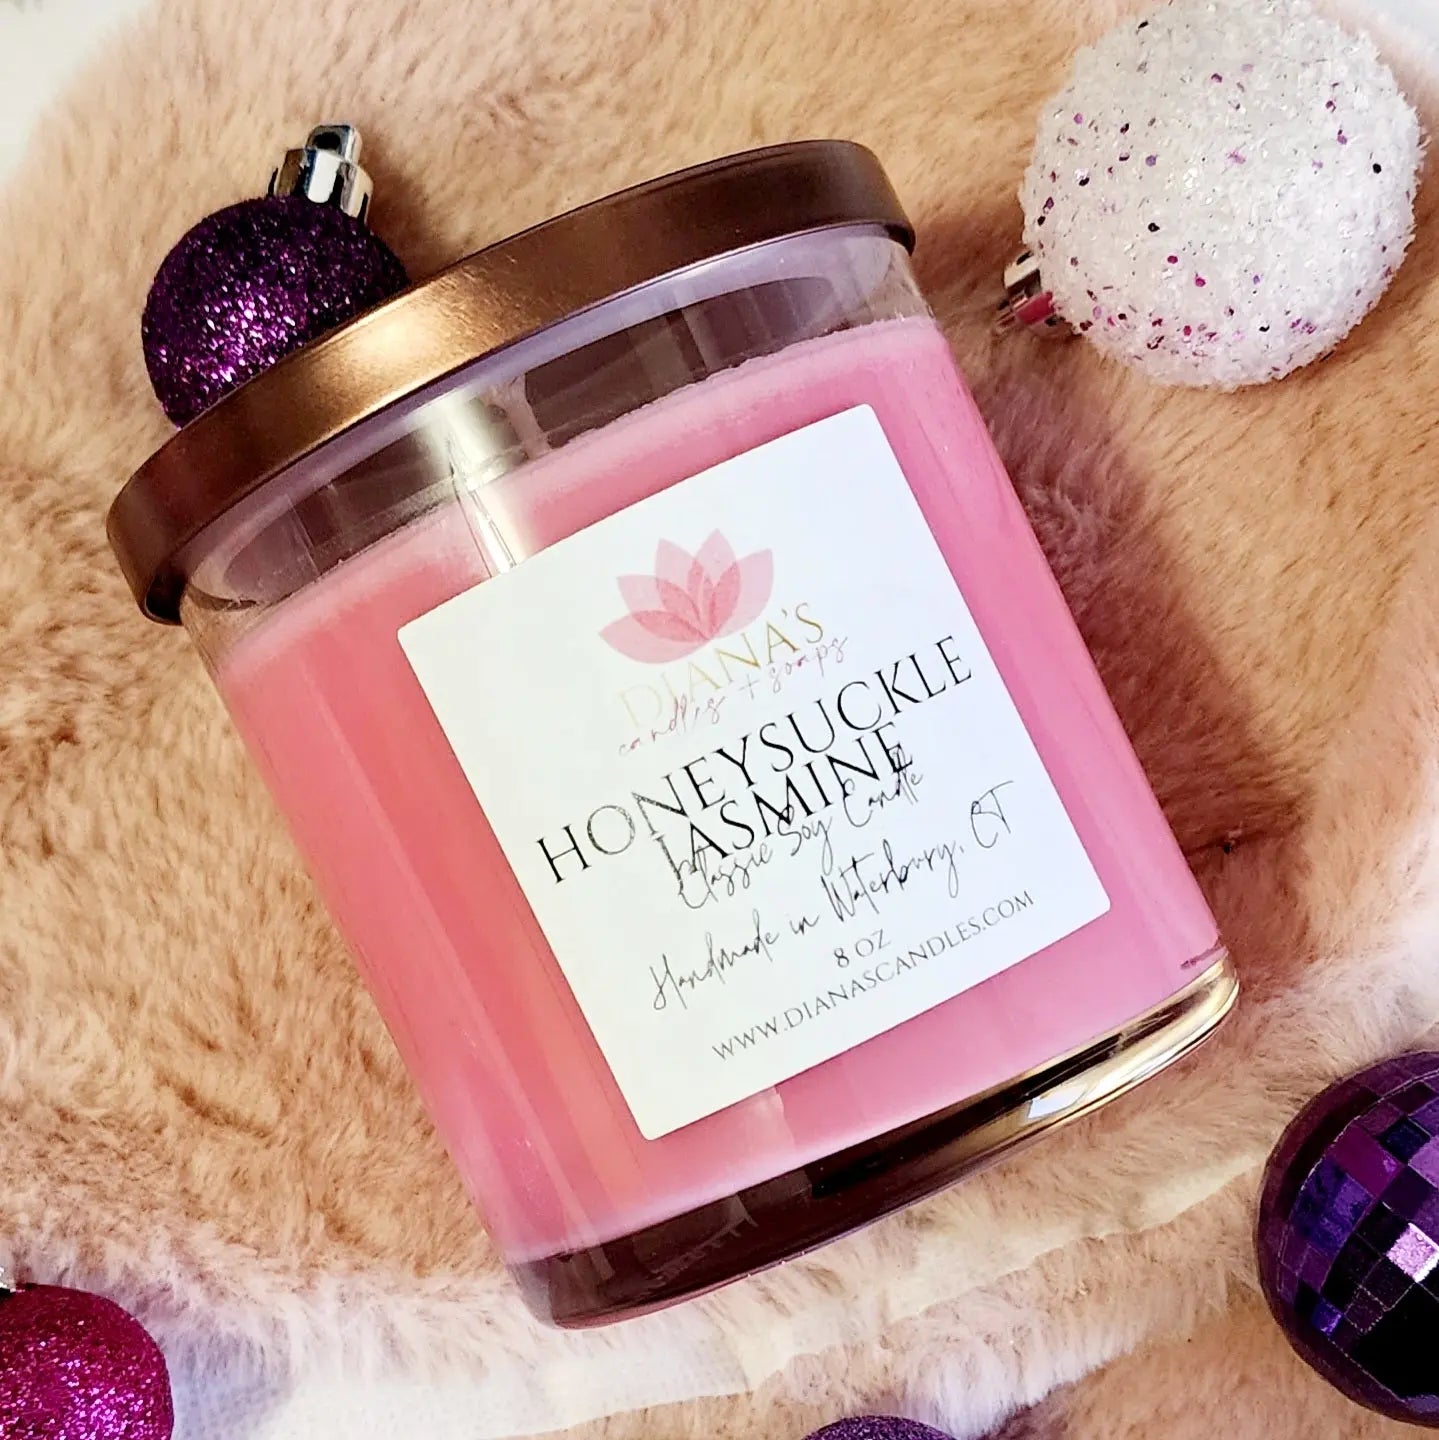 Honeysuckle Jasmine Candle - Diana's Candles and Soaps 